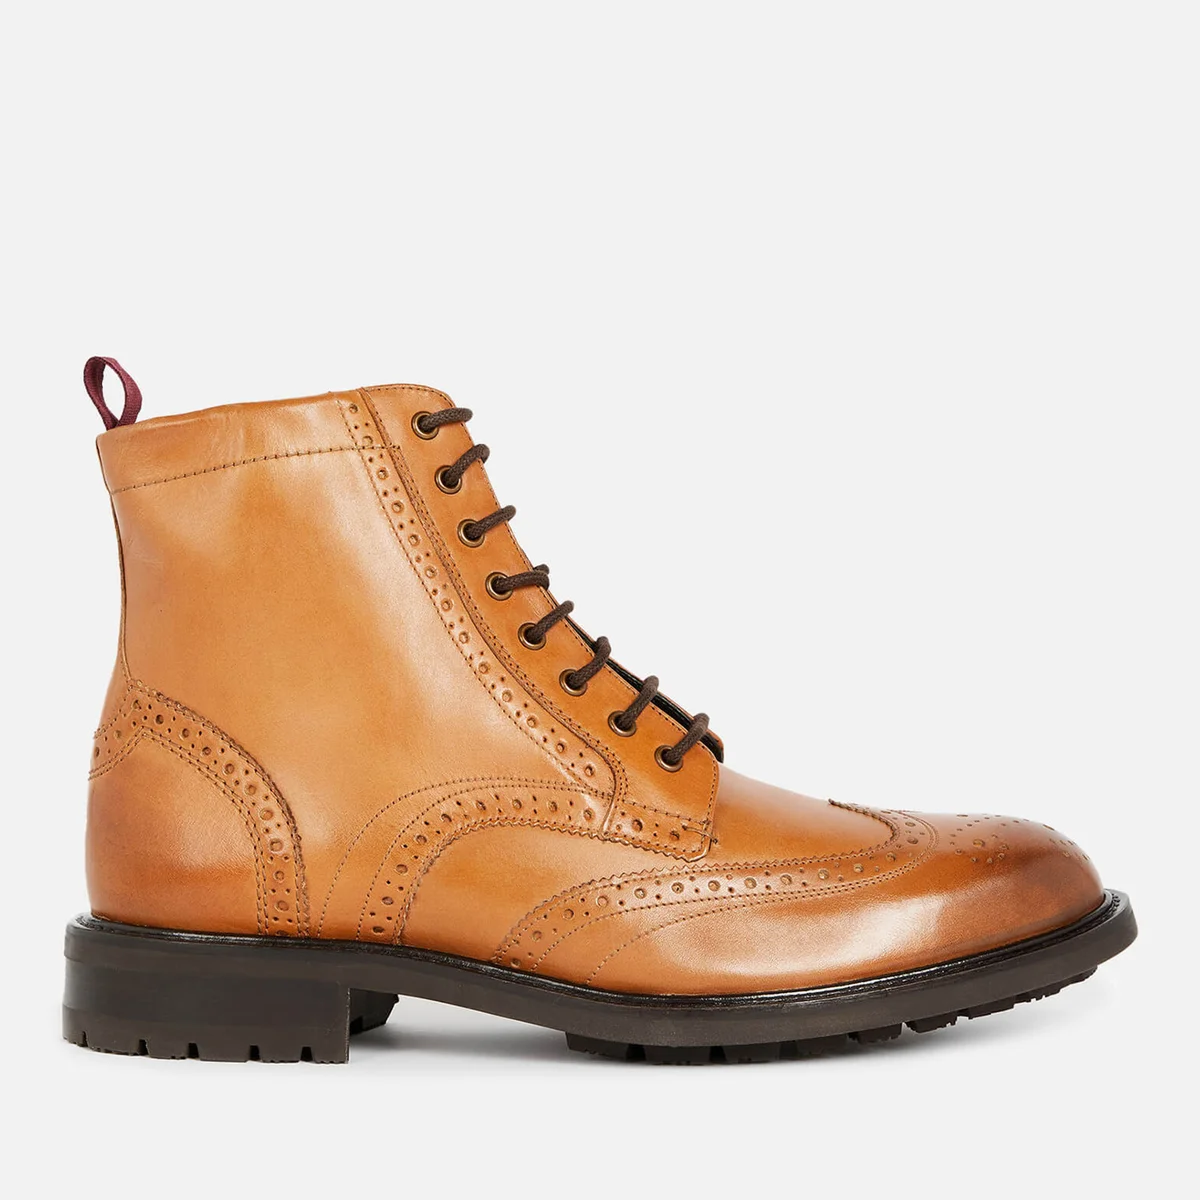 Ted Baker Wadelan Leather Brogue Boots Image 1